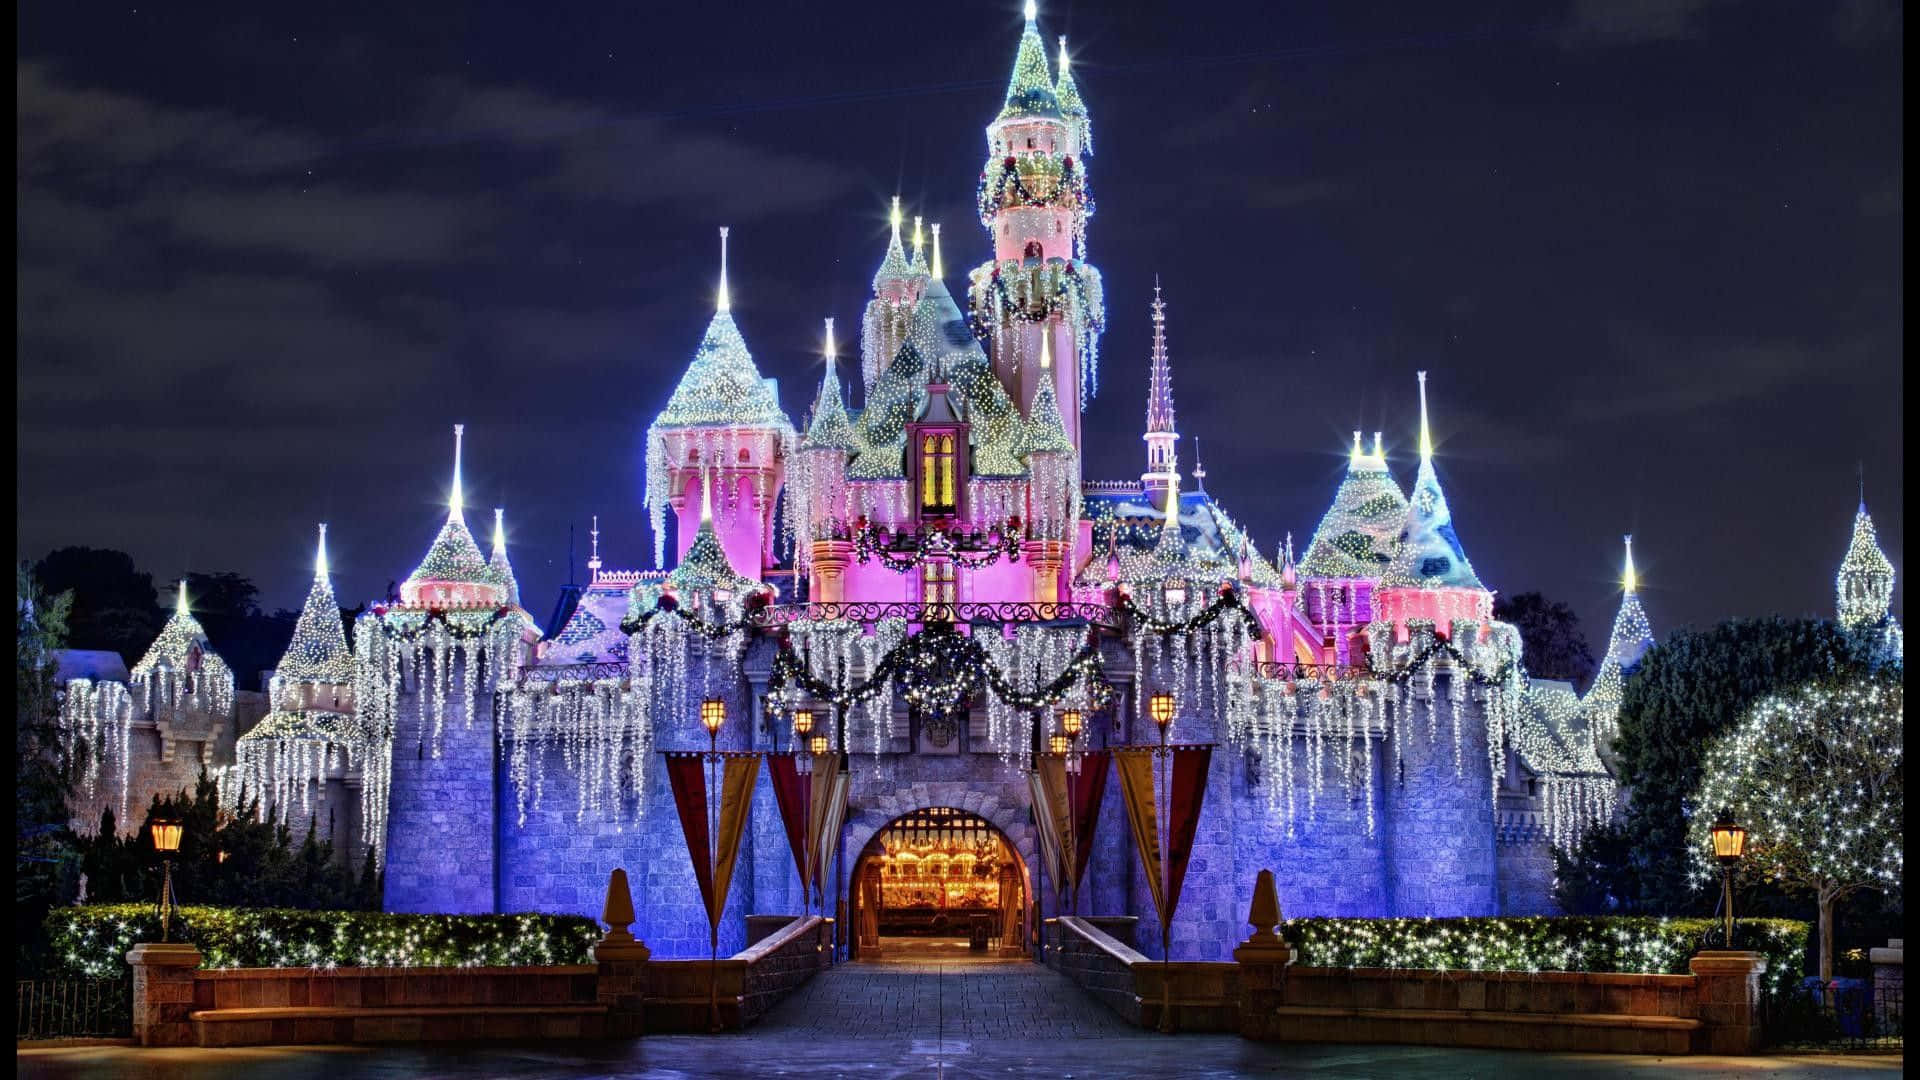 Disneyland Castle At Night With Lights